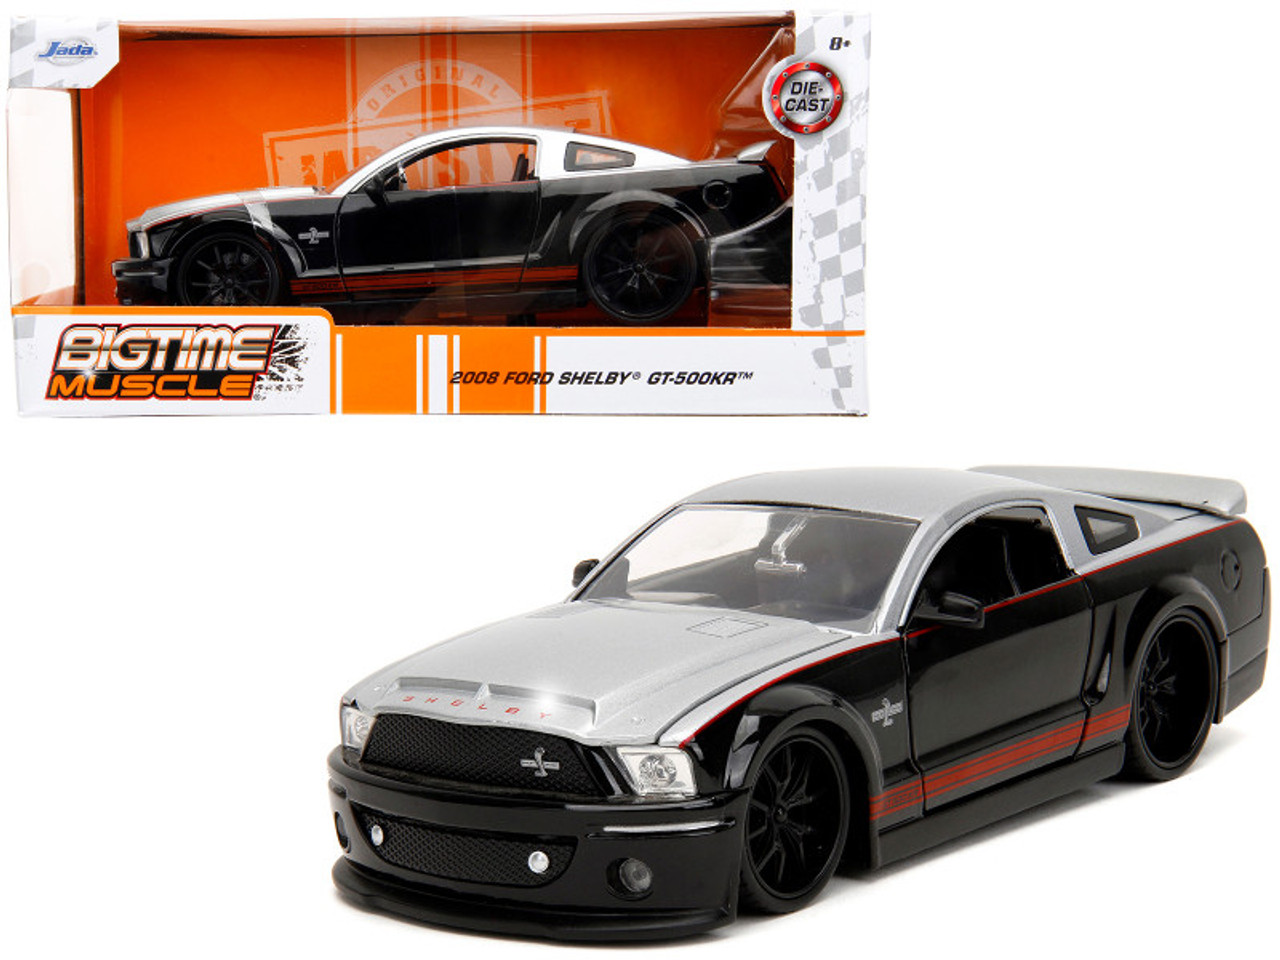 2008 Ford Shelby Mustang GT-500KR Silver and Black with Red Stripes ...